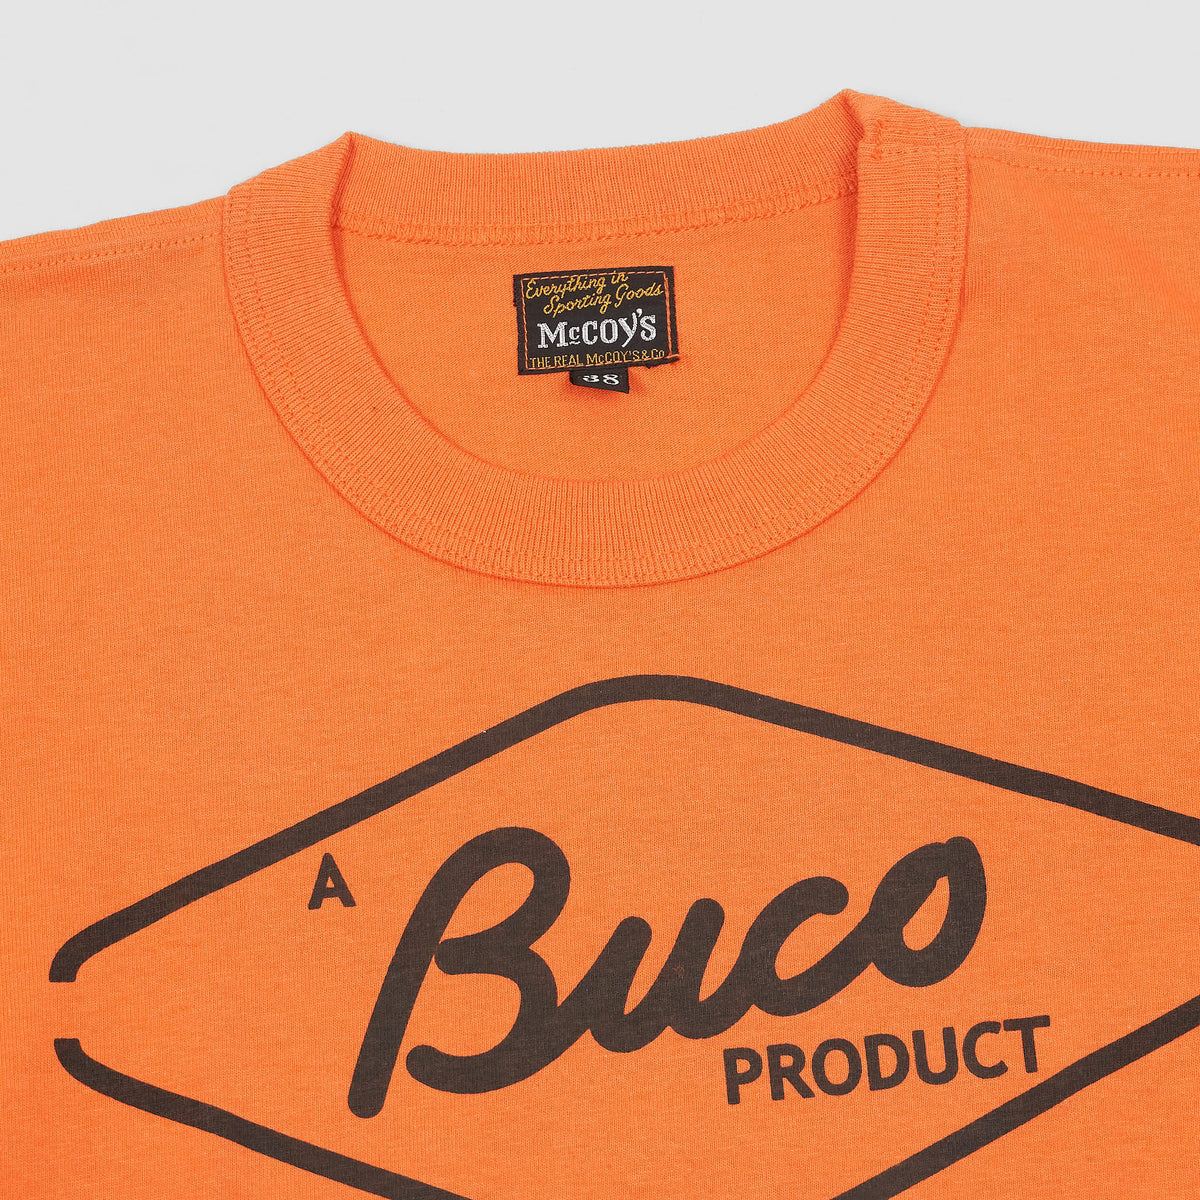 The Real McCoy&#39;s Buco «Engineers» Short Sleeve Crew Neck T-Shirt